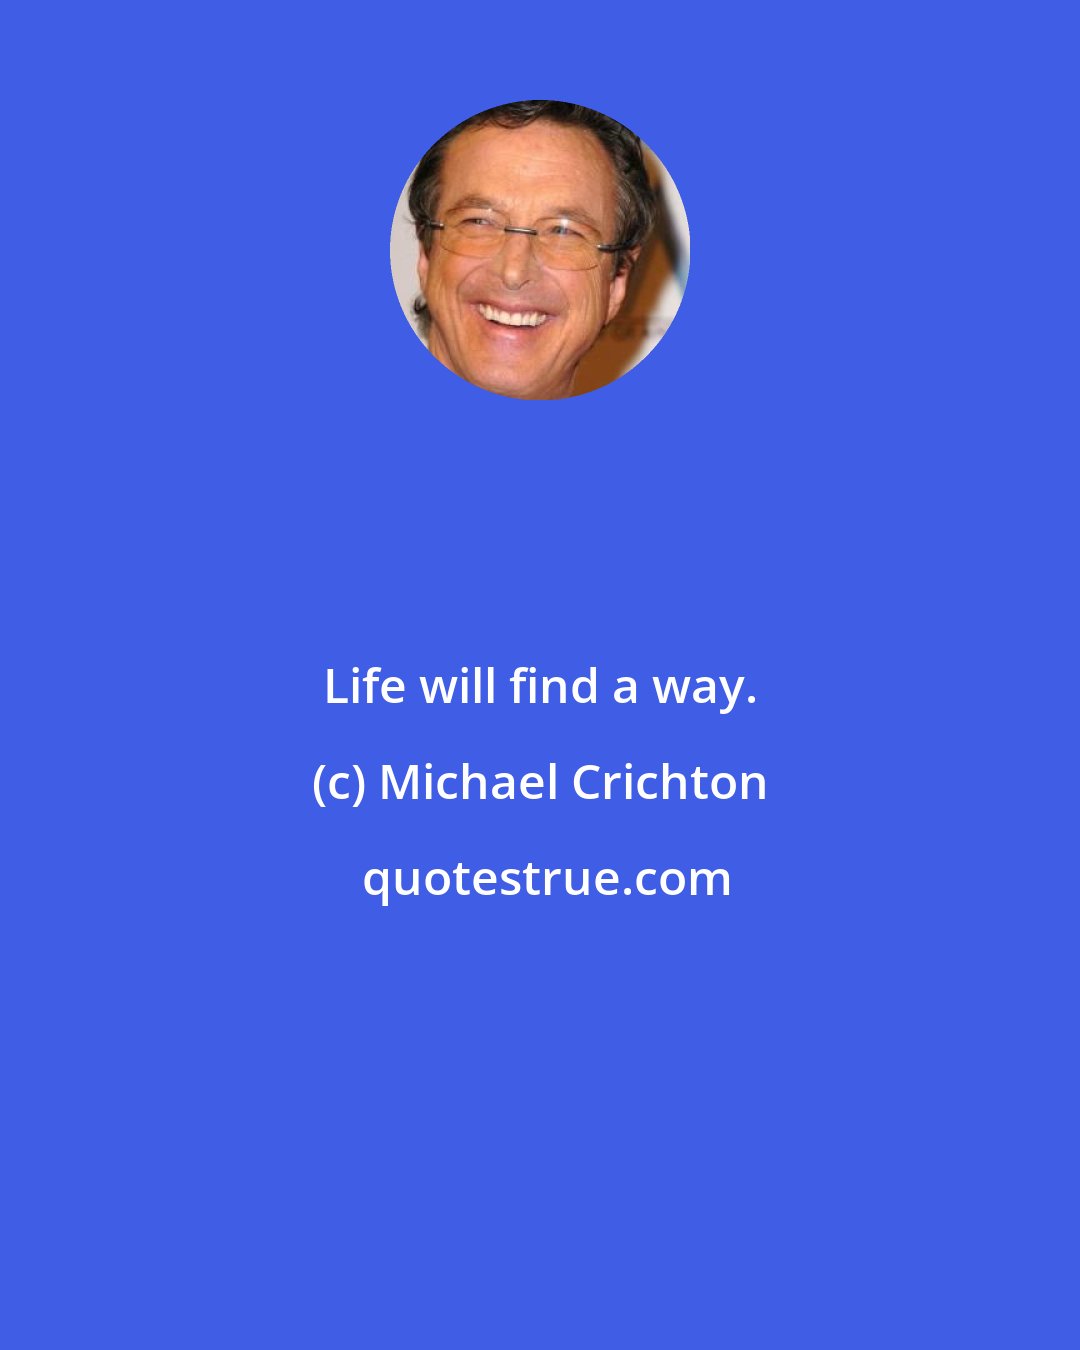 Michael Crichton: Life will find a way.